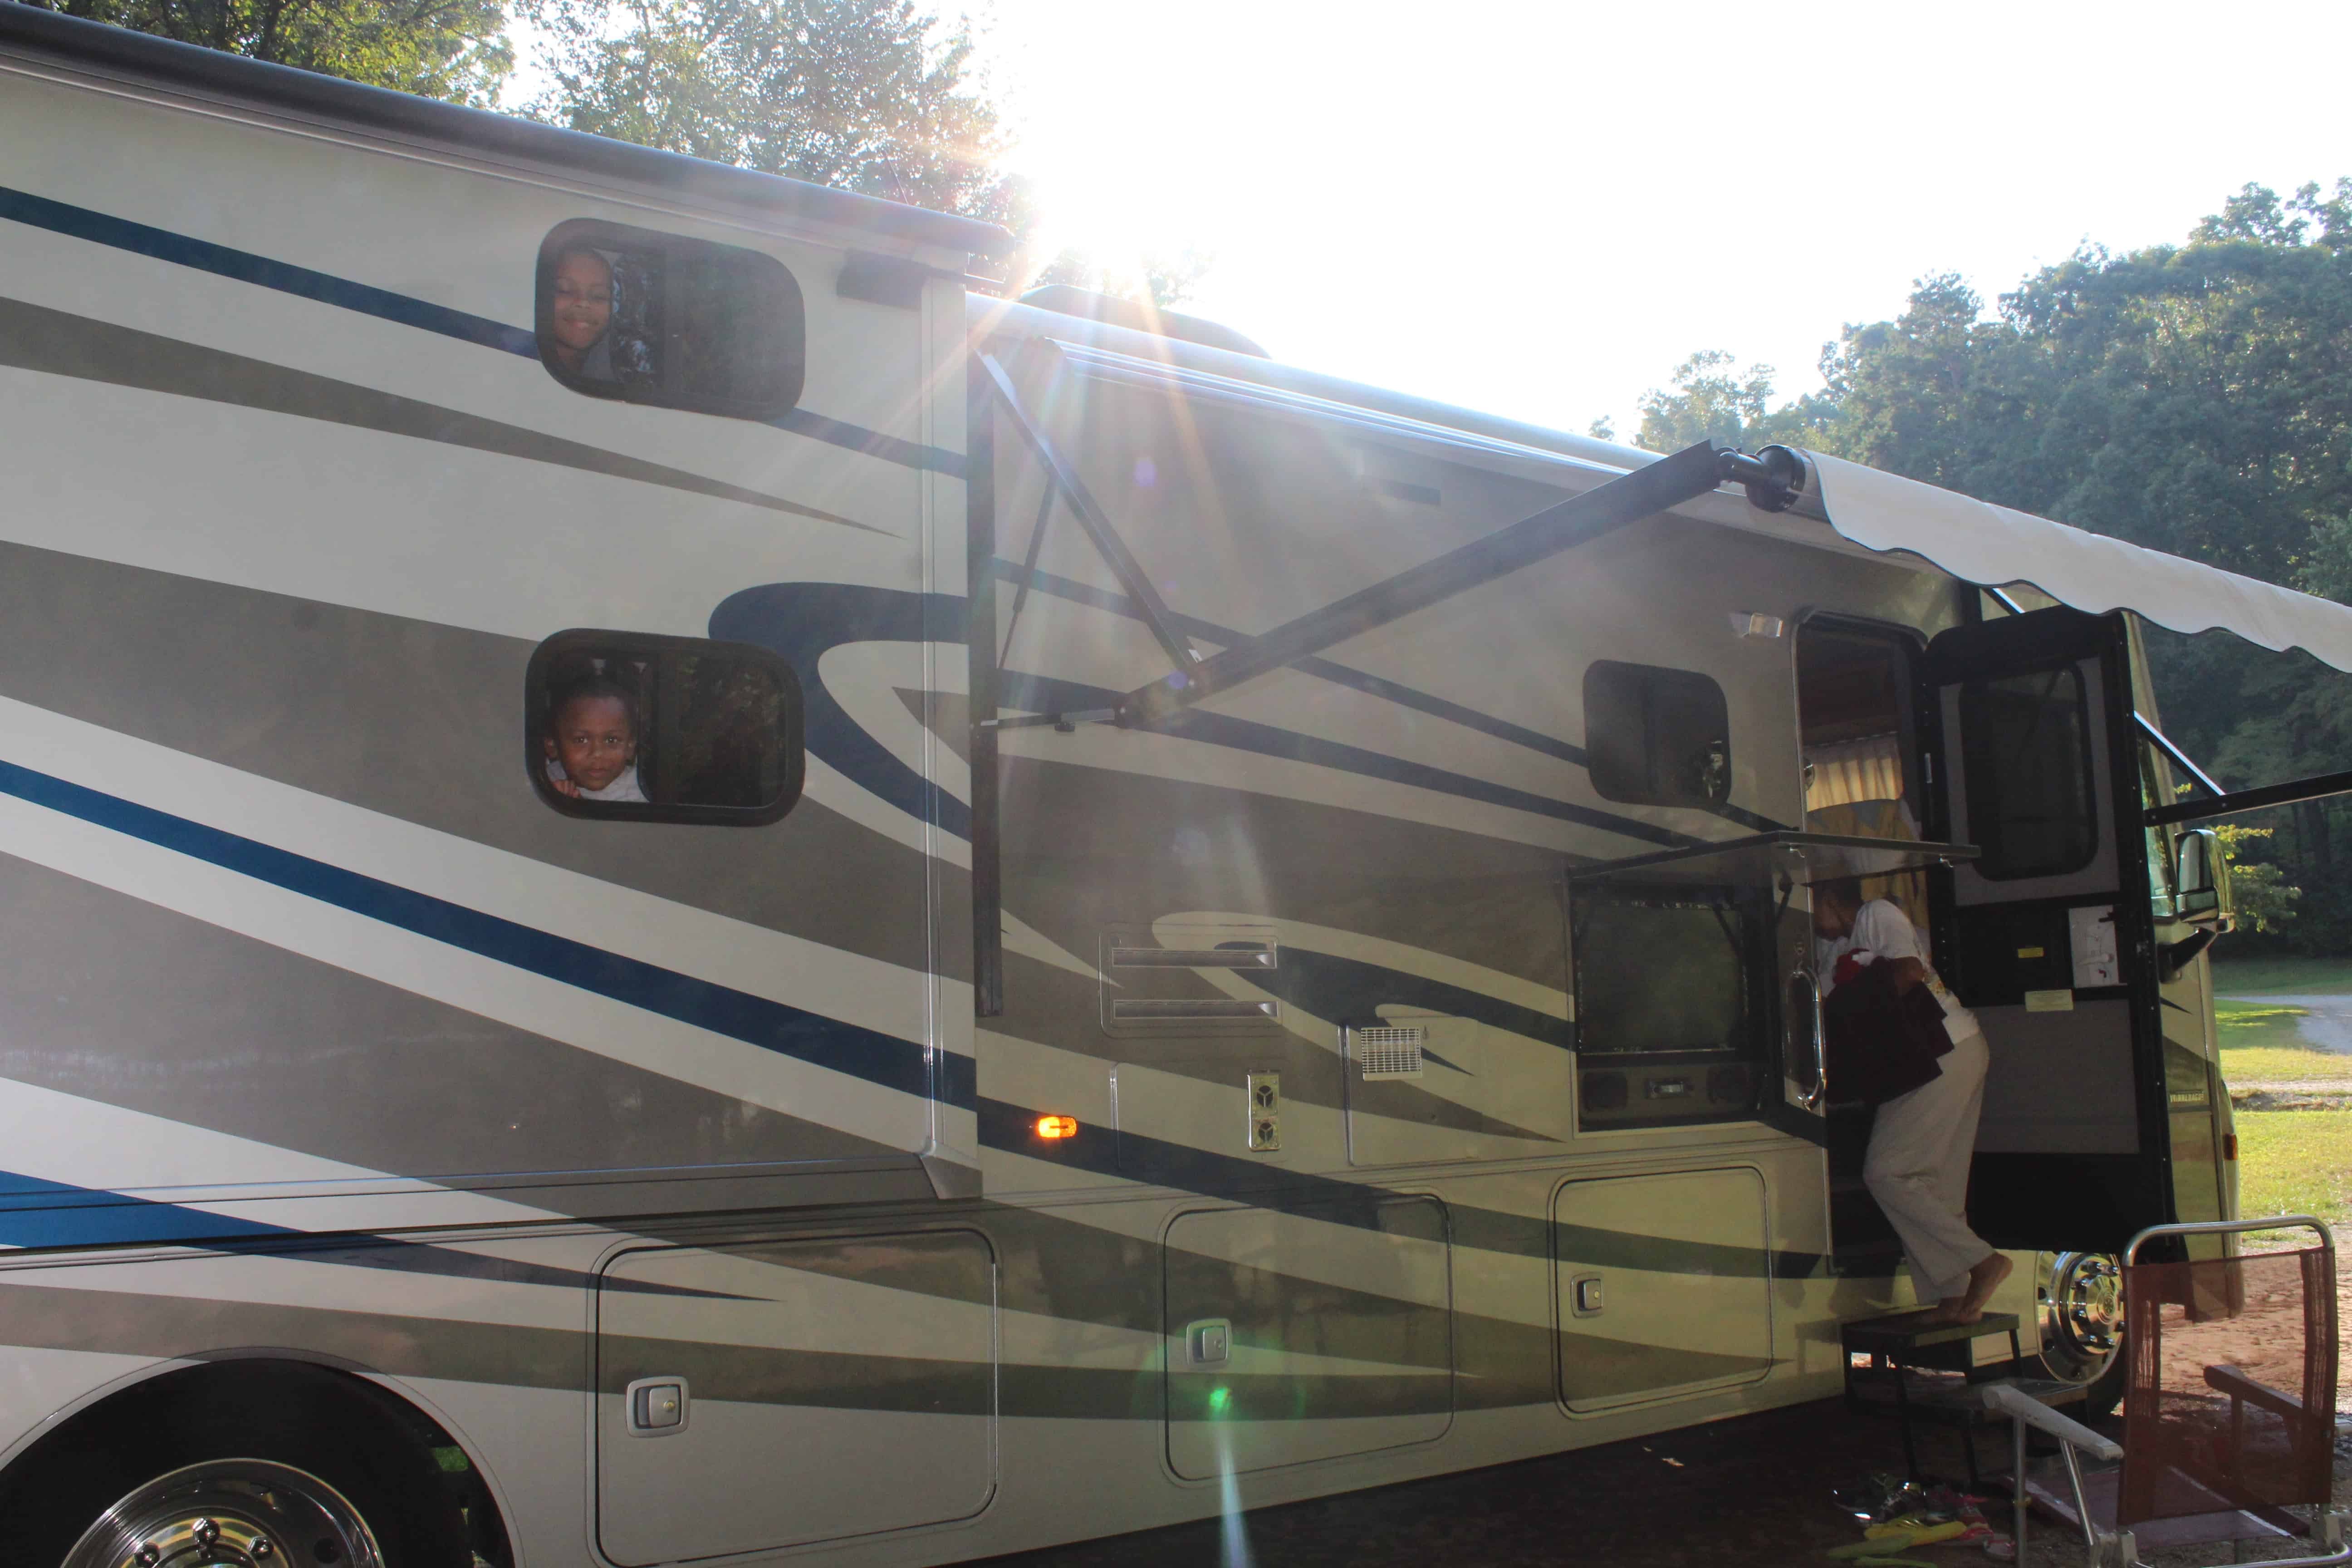 10 reasons to take a trip with go RVing